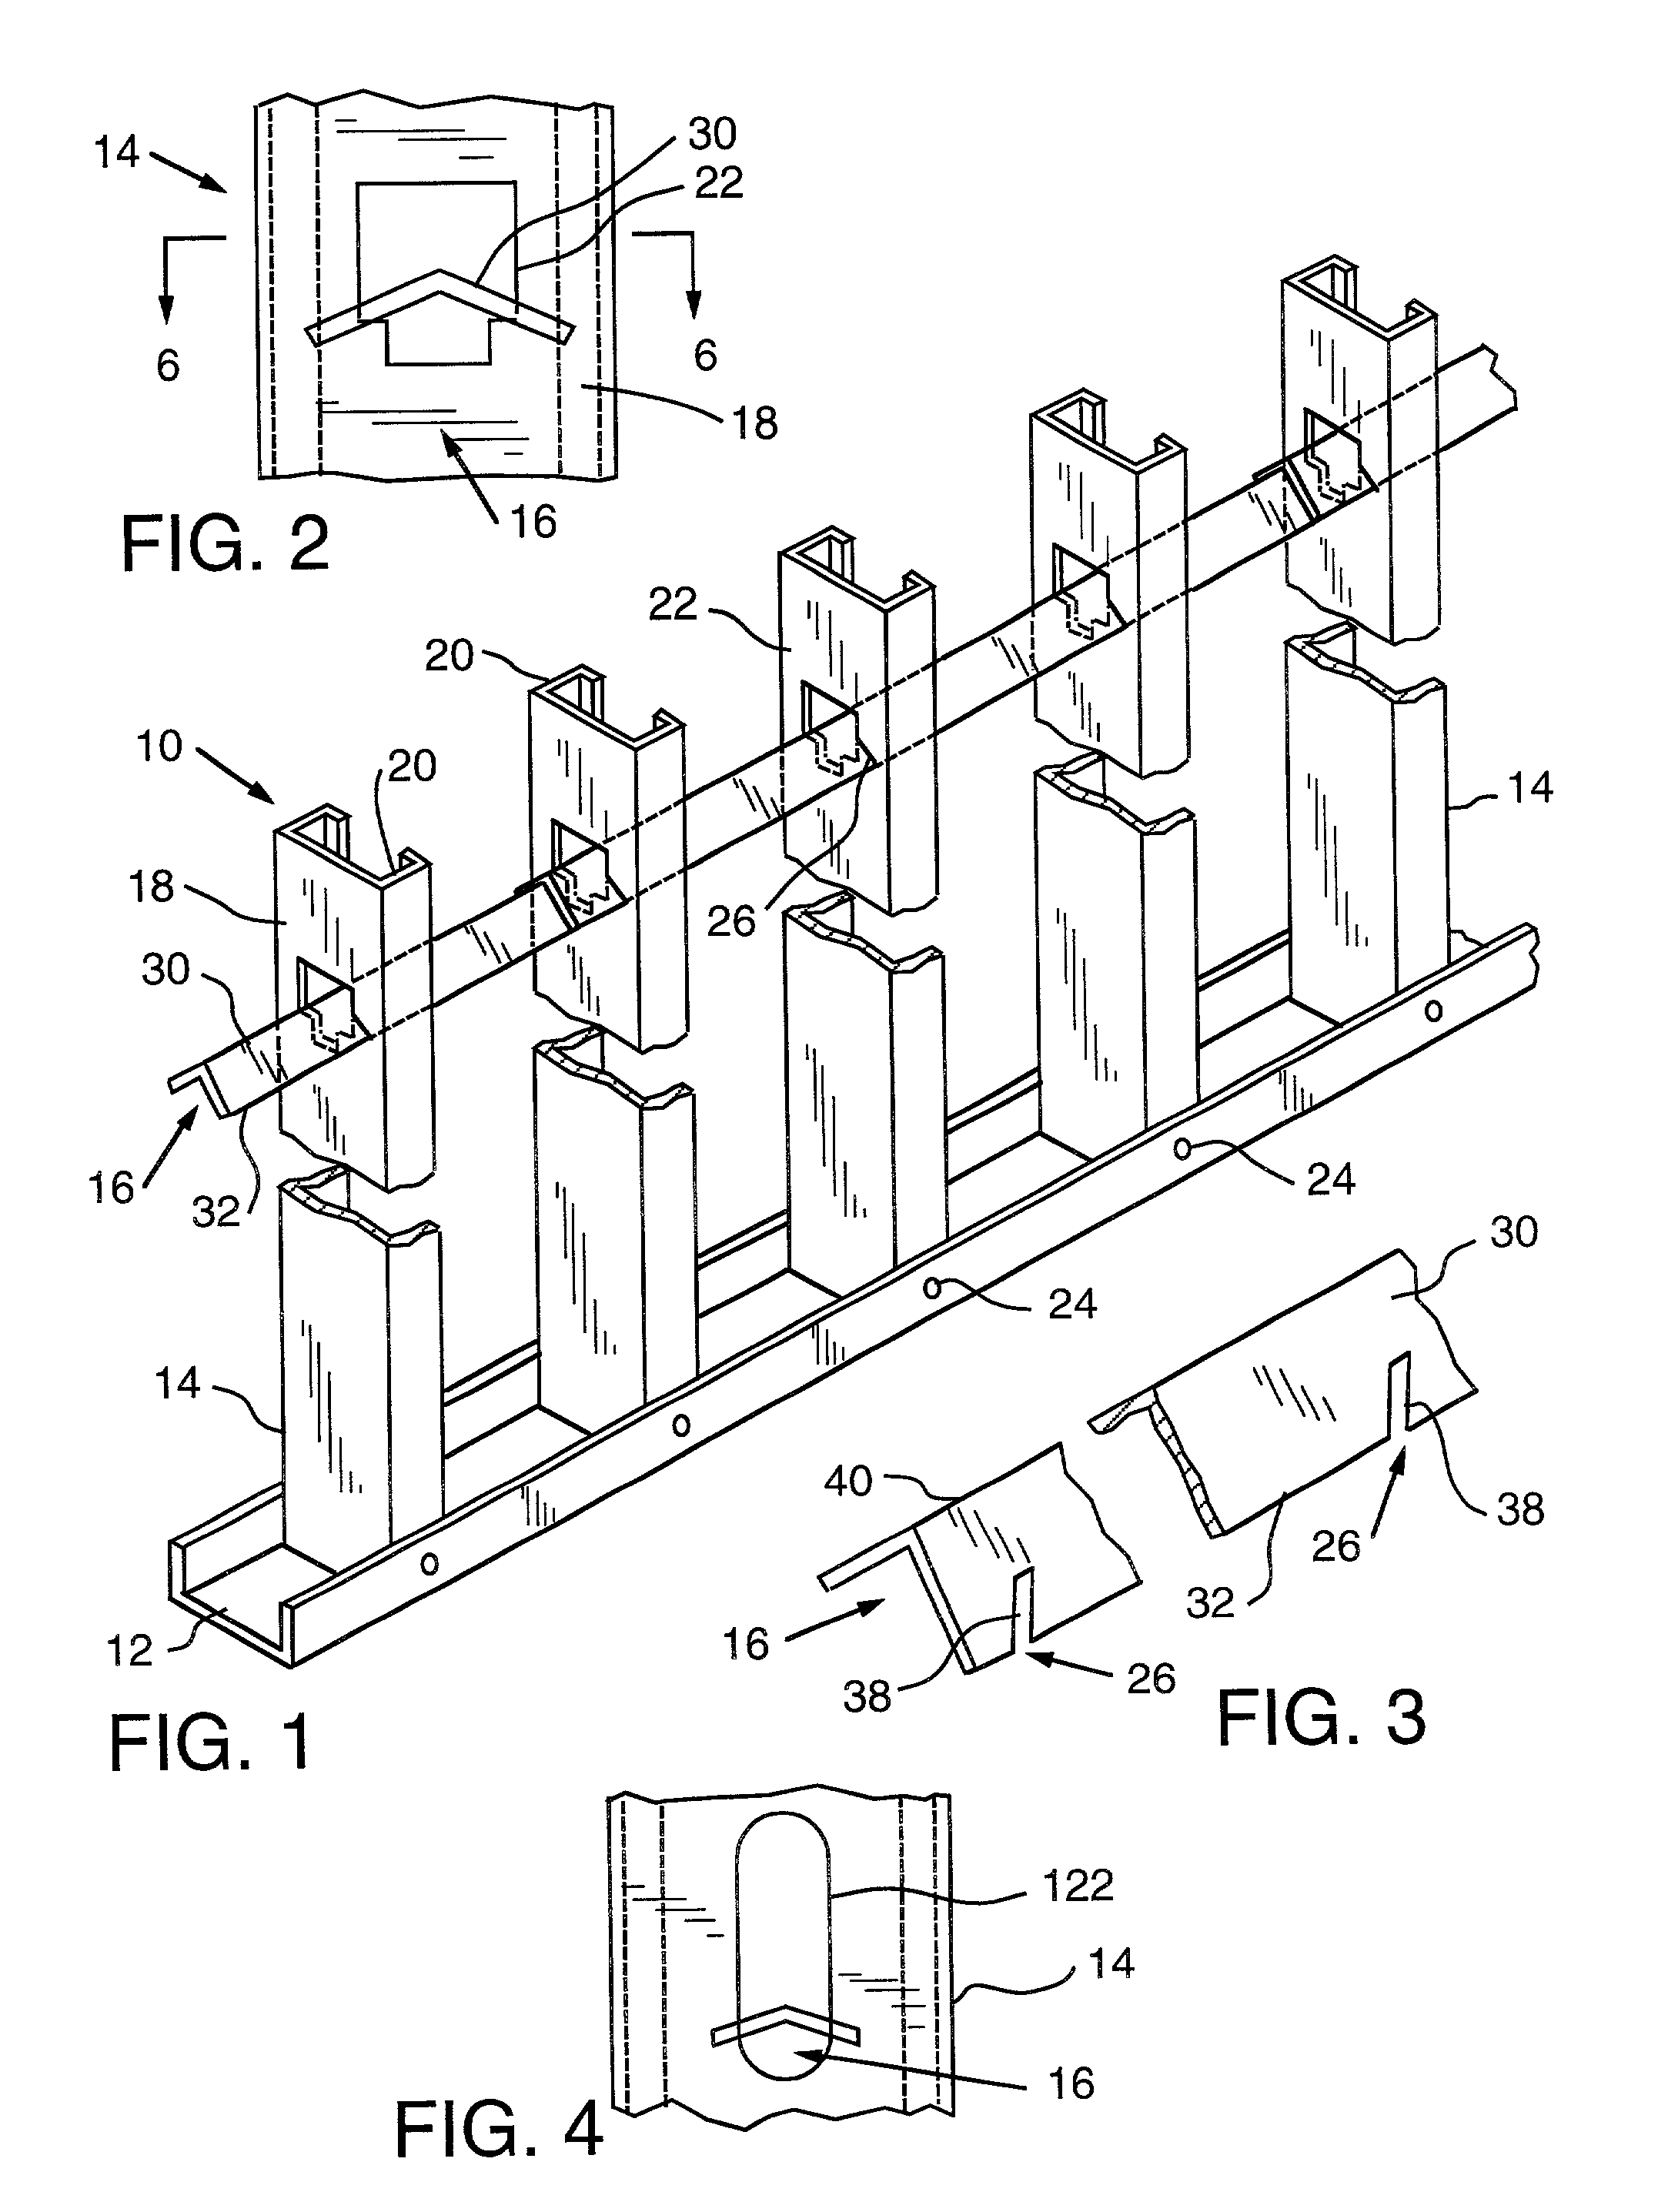 Bridging system for off-module studs